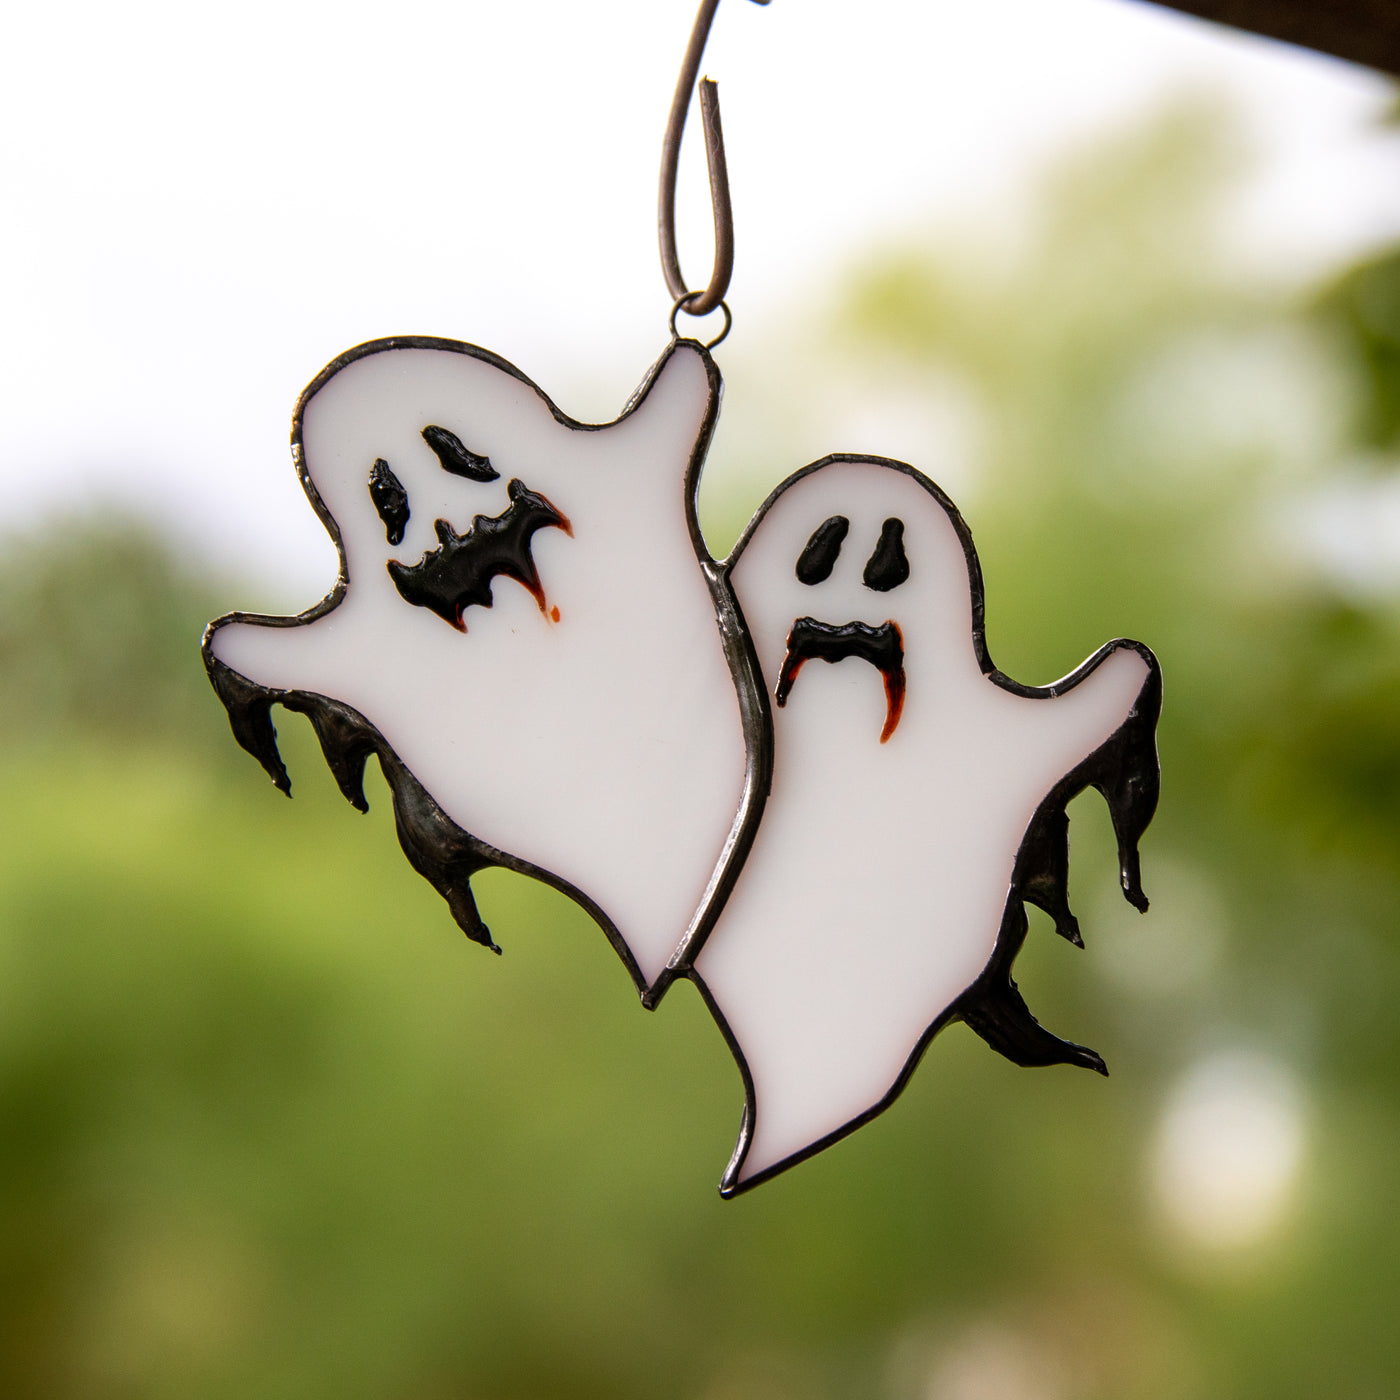 Stained glass spooky ghosts window hanging for Halloween